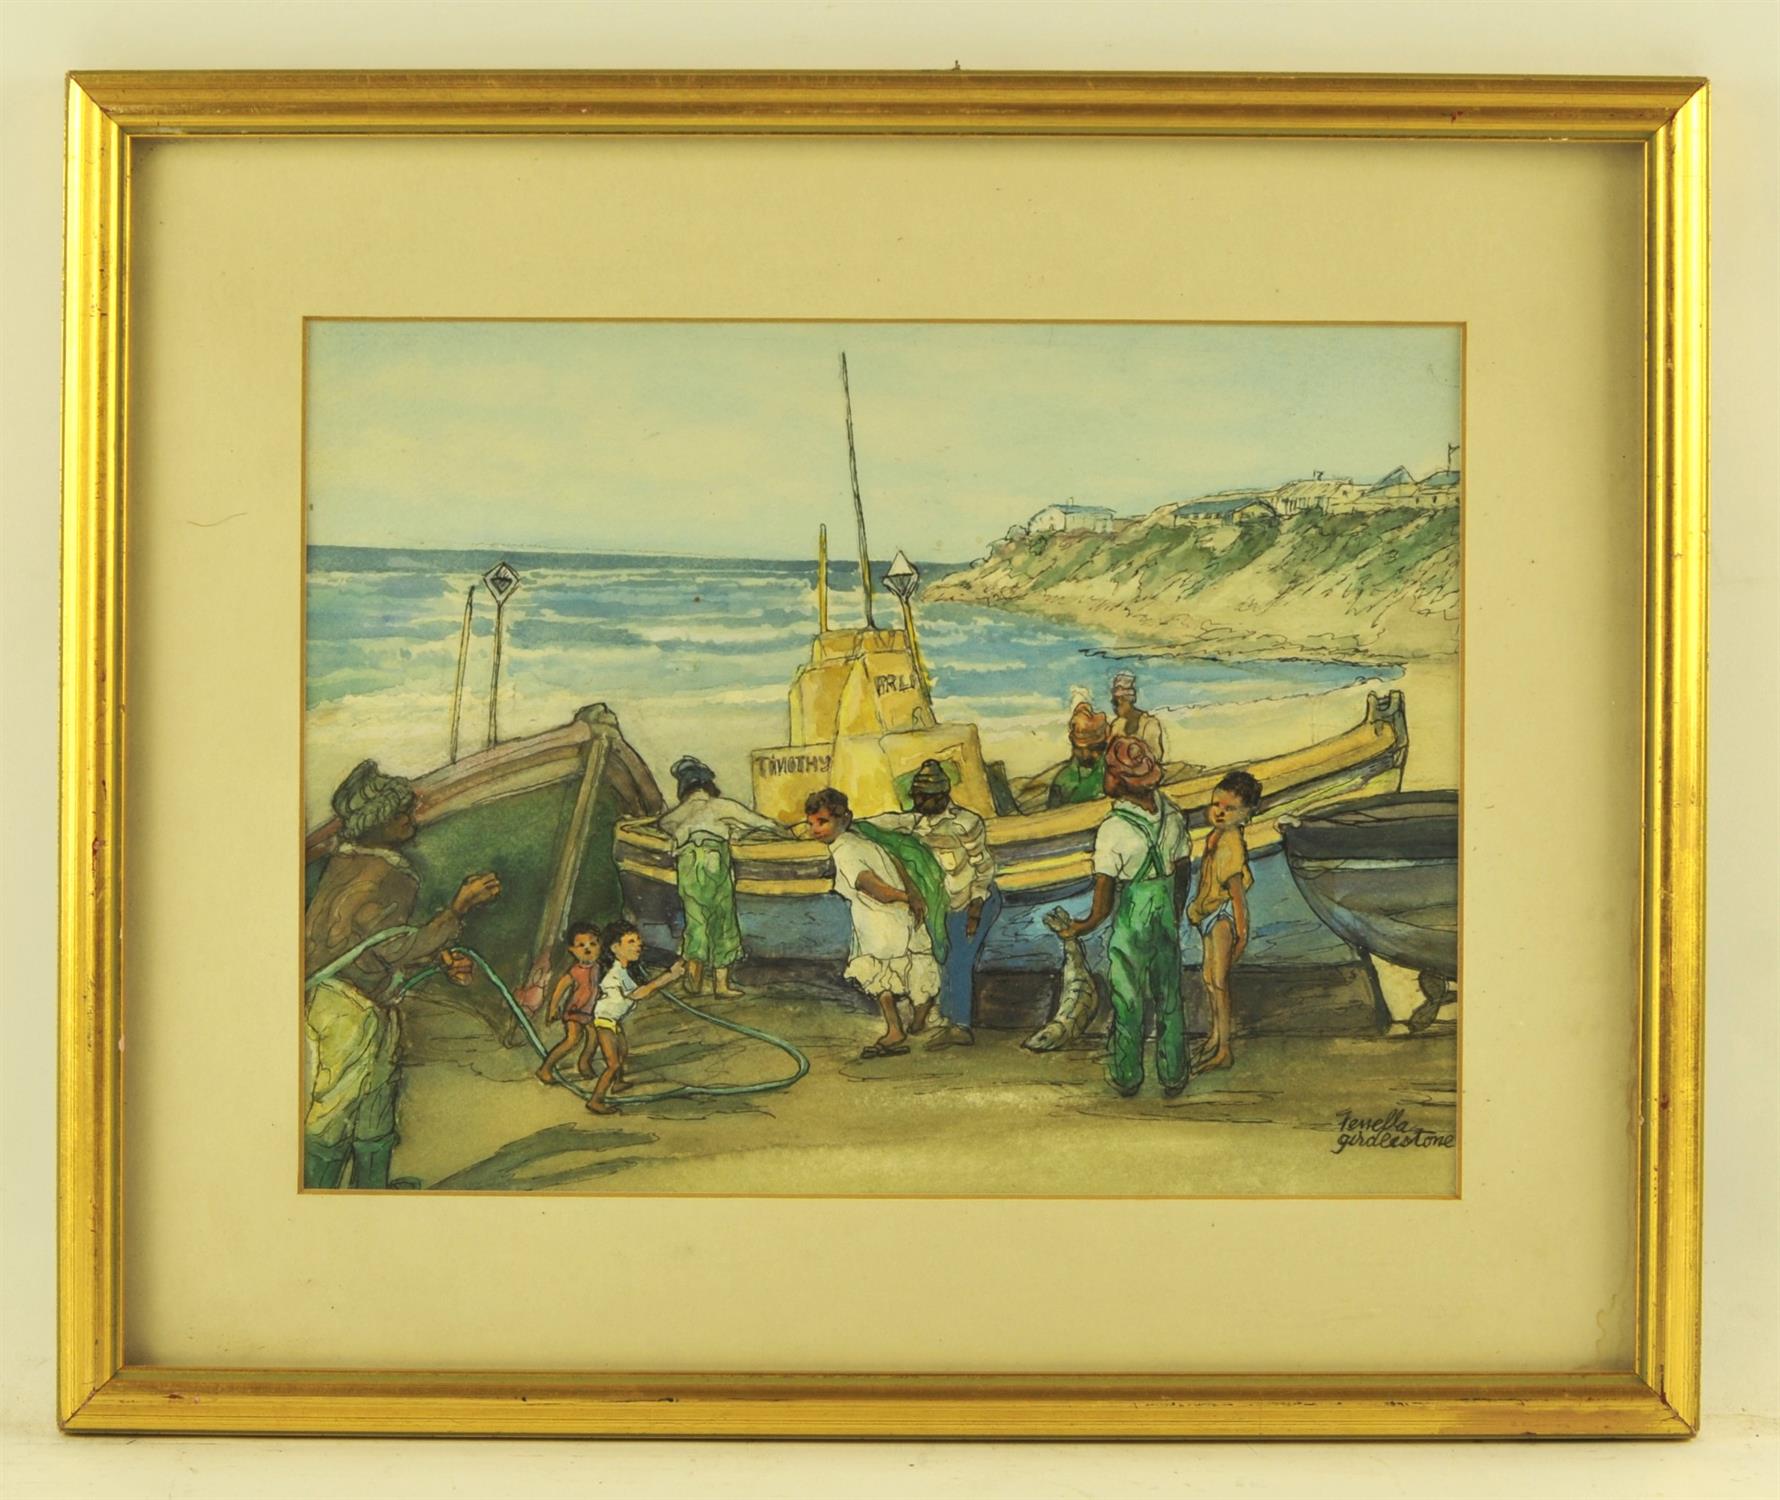 Fenella Girdlestone (early 20th century), Figures round a beached boat ‘Timothy’, possibly India,